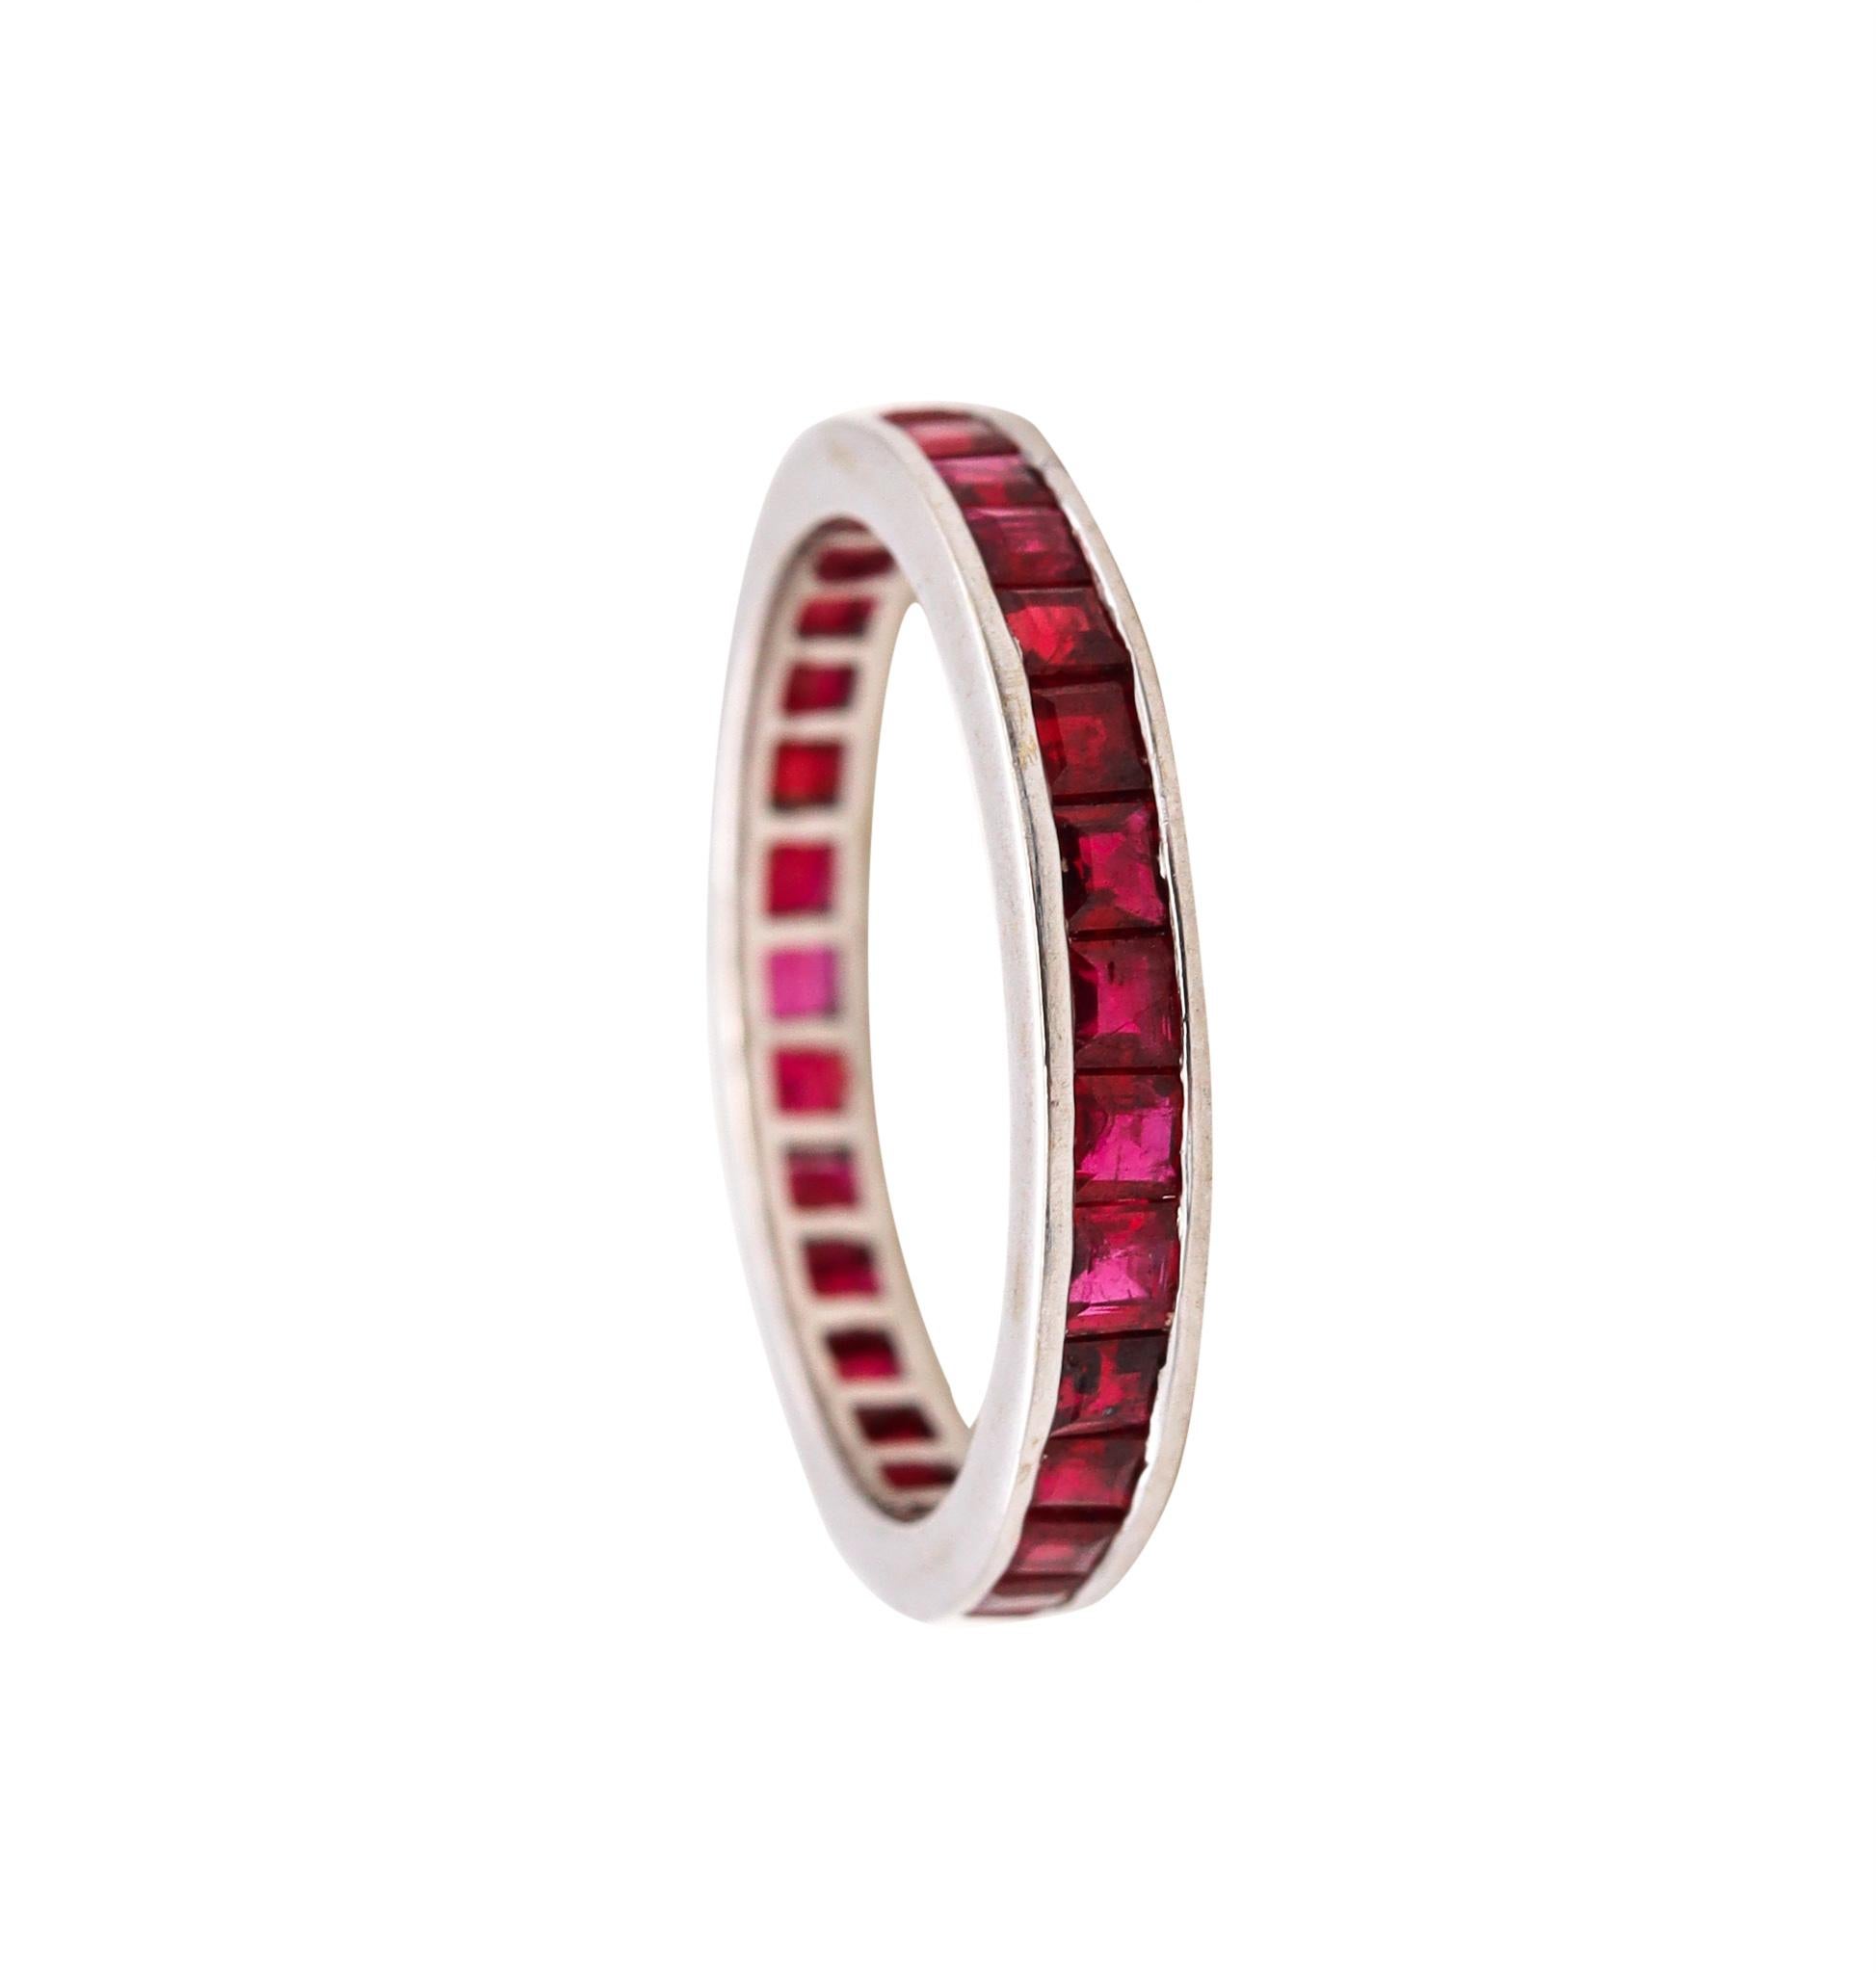 Exceptional eternity ring with Natural Rubies.

Impeccable modern full band carefully crafted in solid white gold of 18 karats, with high polished finish. It is mounted in a channel setting, with 30 calibrated French squared steps cuts of Burmese